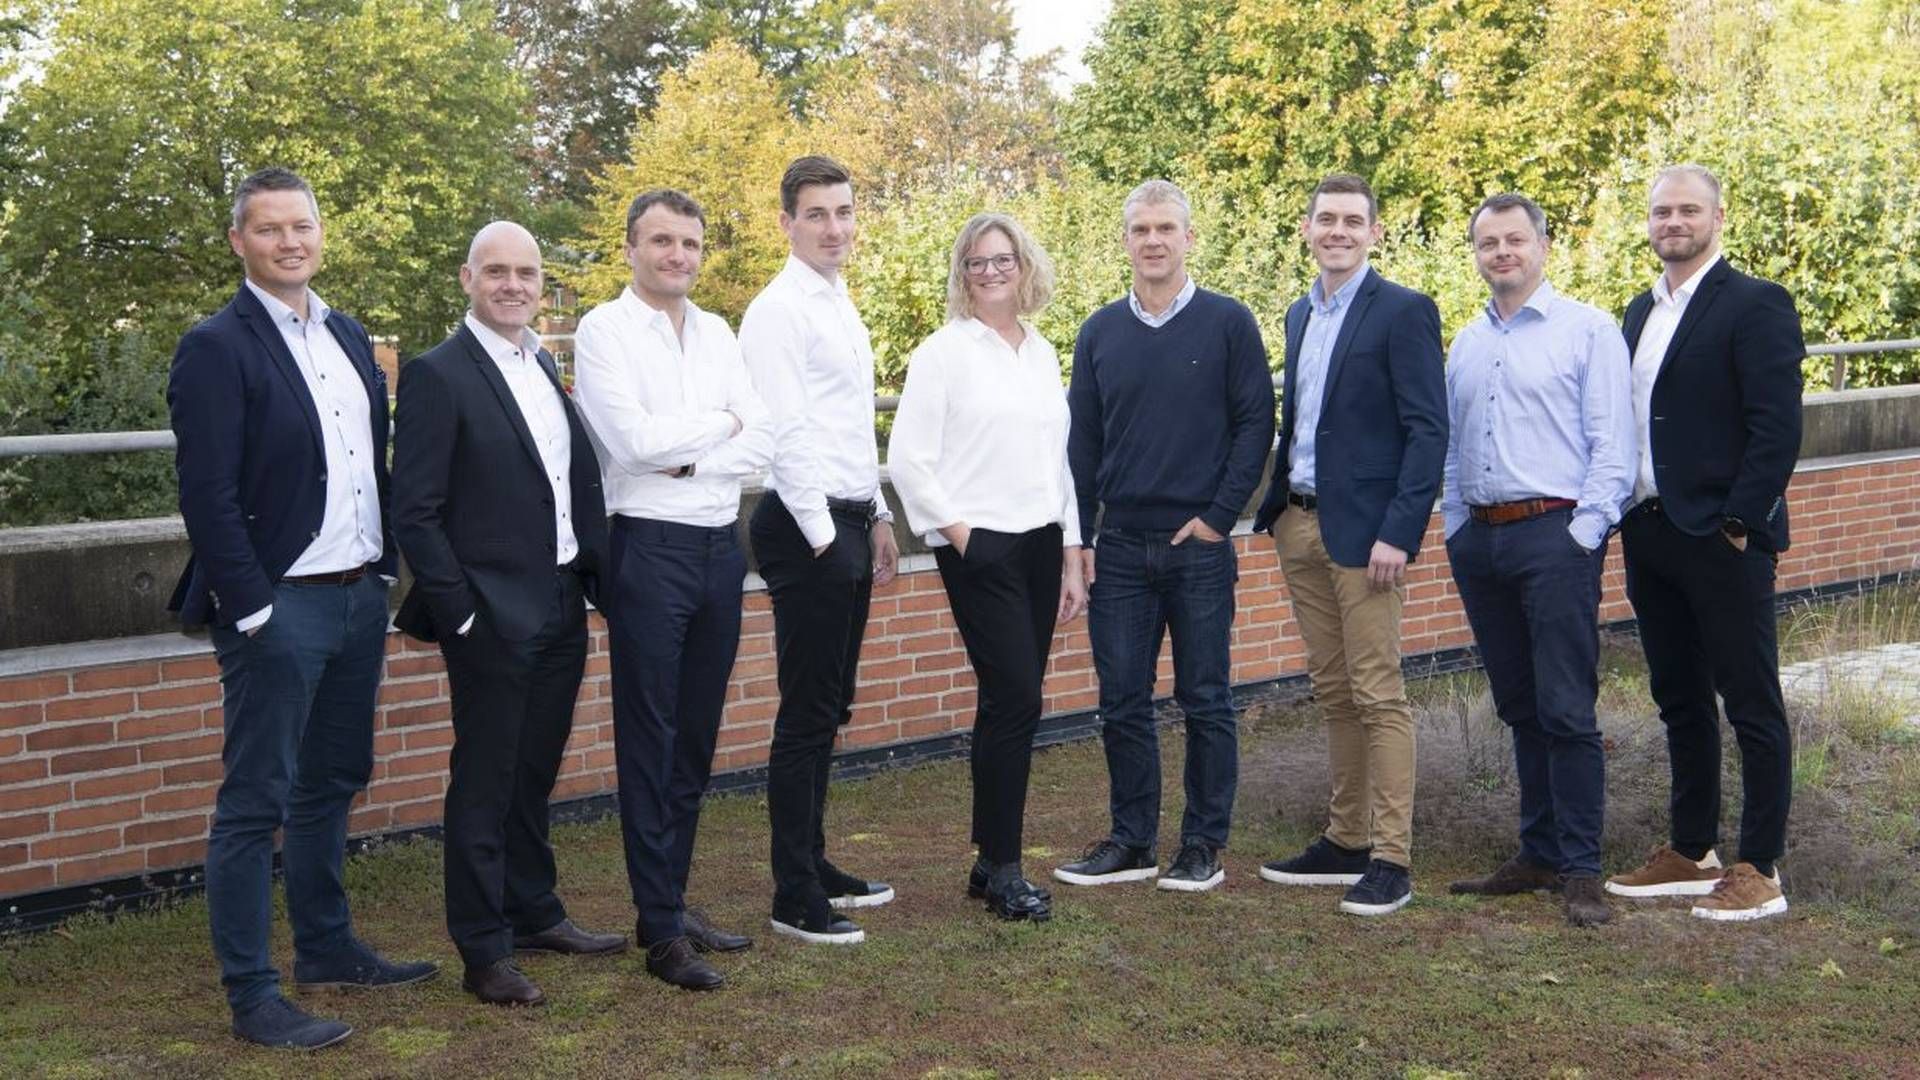 Union Bulk partners Jens Boesen (second from left) and Anders Svarrer (third from left) founded the dry bulk operator together in 2019. | Photo: Union Bulk